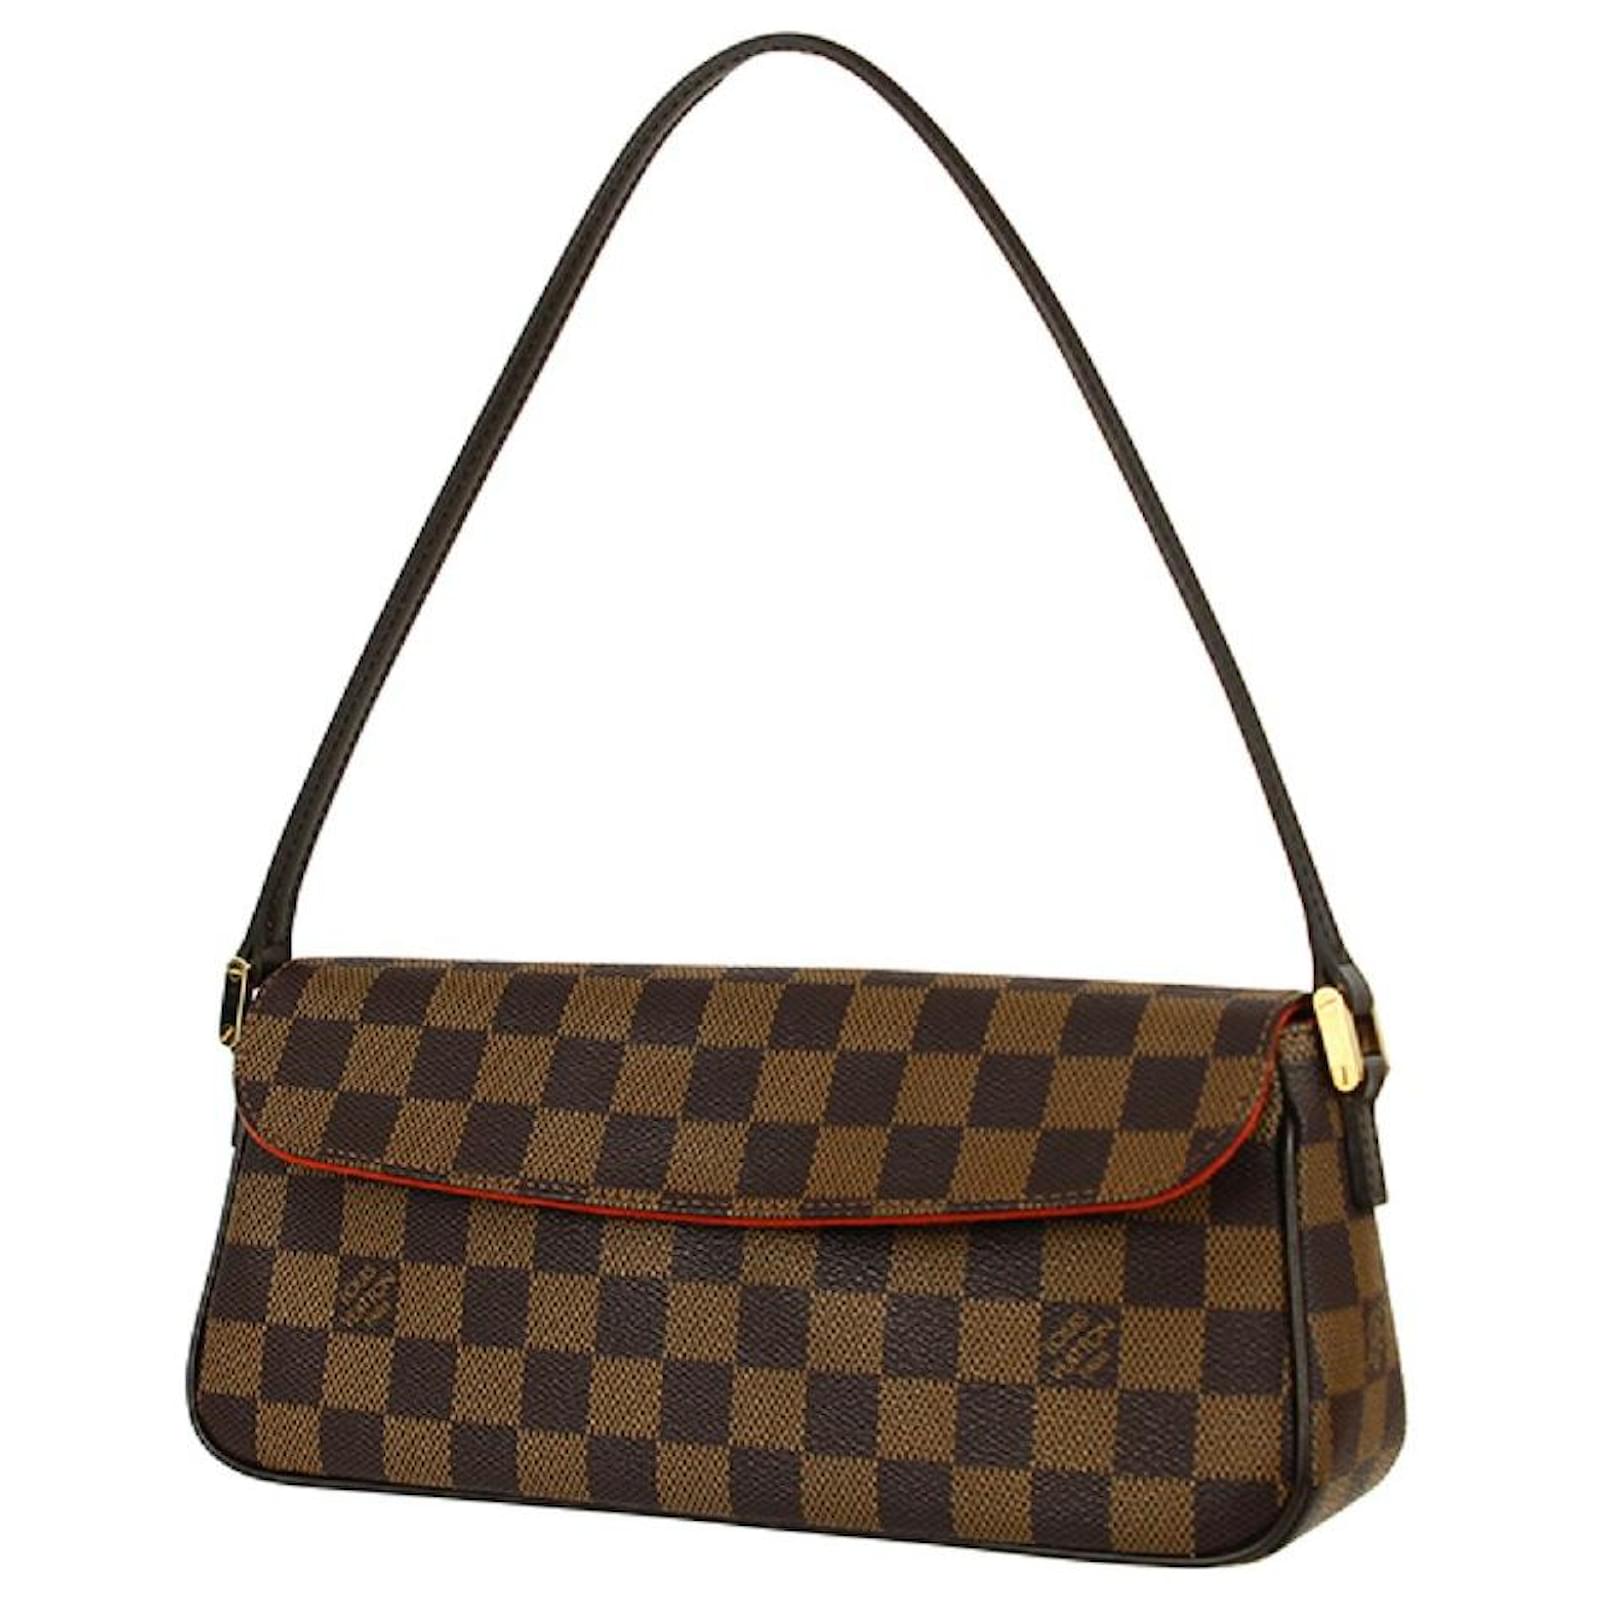 Louis Vuitton Pre-owned Women's Leather Shoulder Bag - Brown - One Size